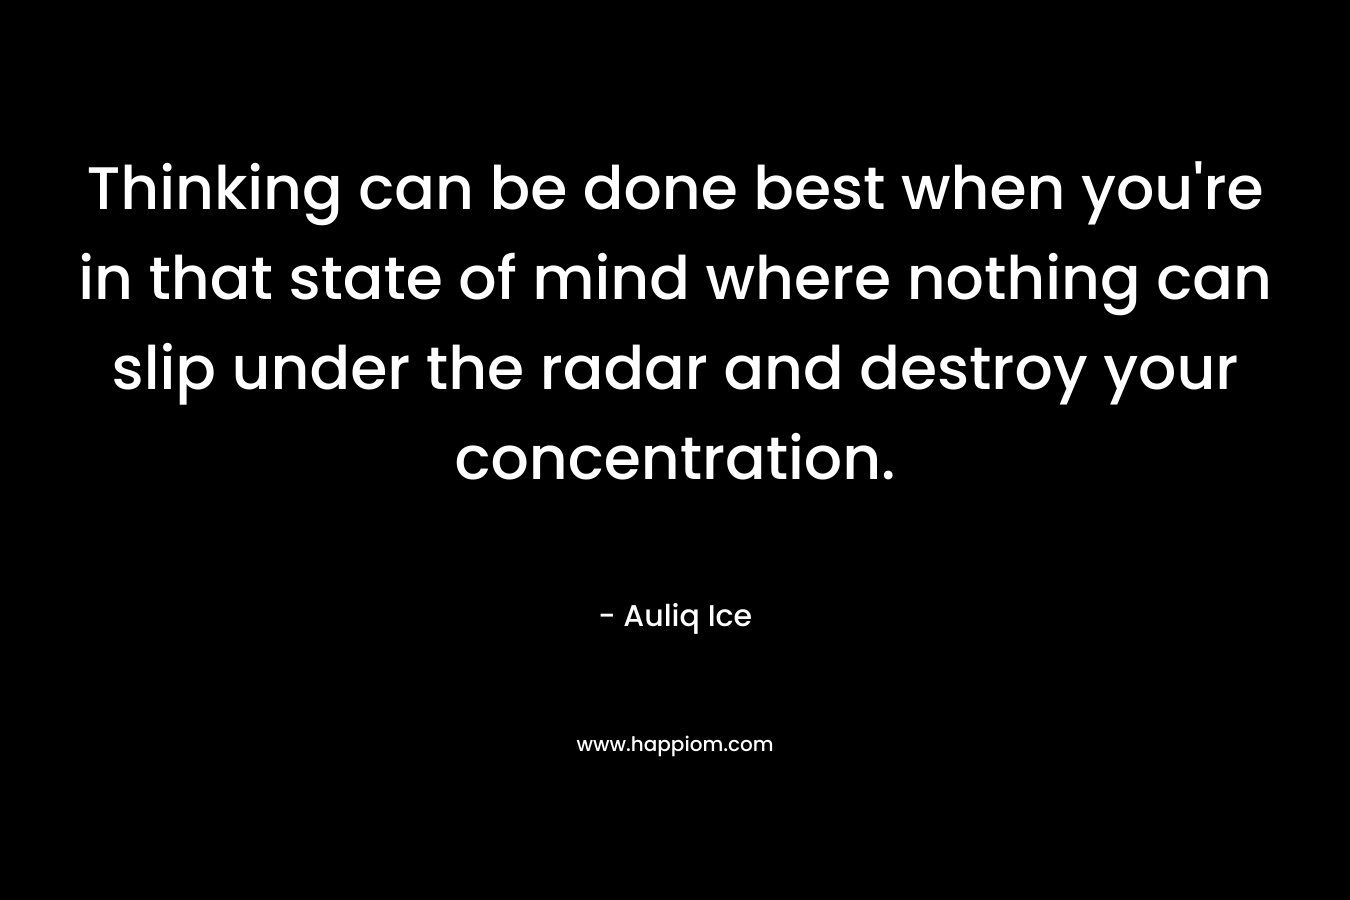 Thinking can be done best when you're in that state of mind where nothing can slip under the radar and destroy your concentration.